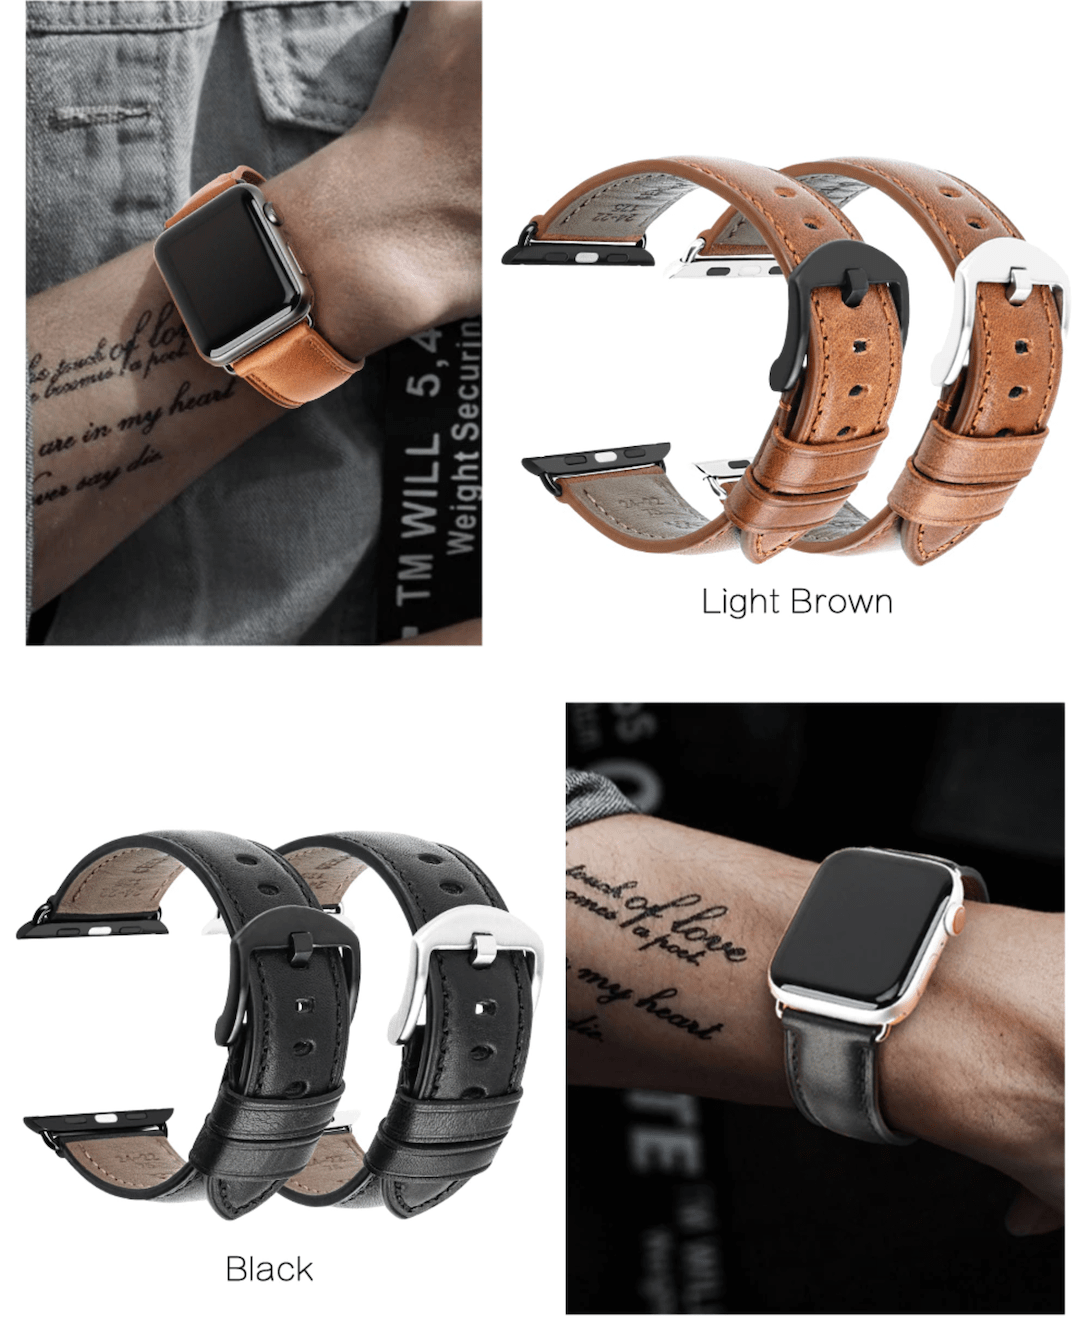 Genuine leather apple watch premium high quality black straps in india